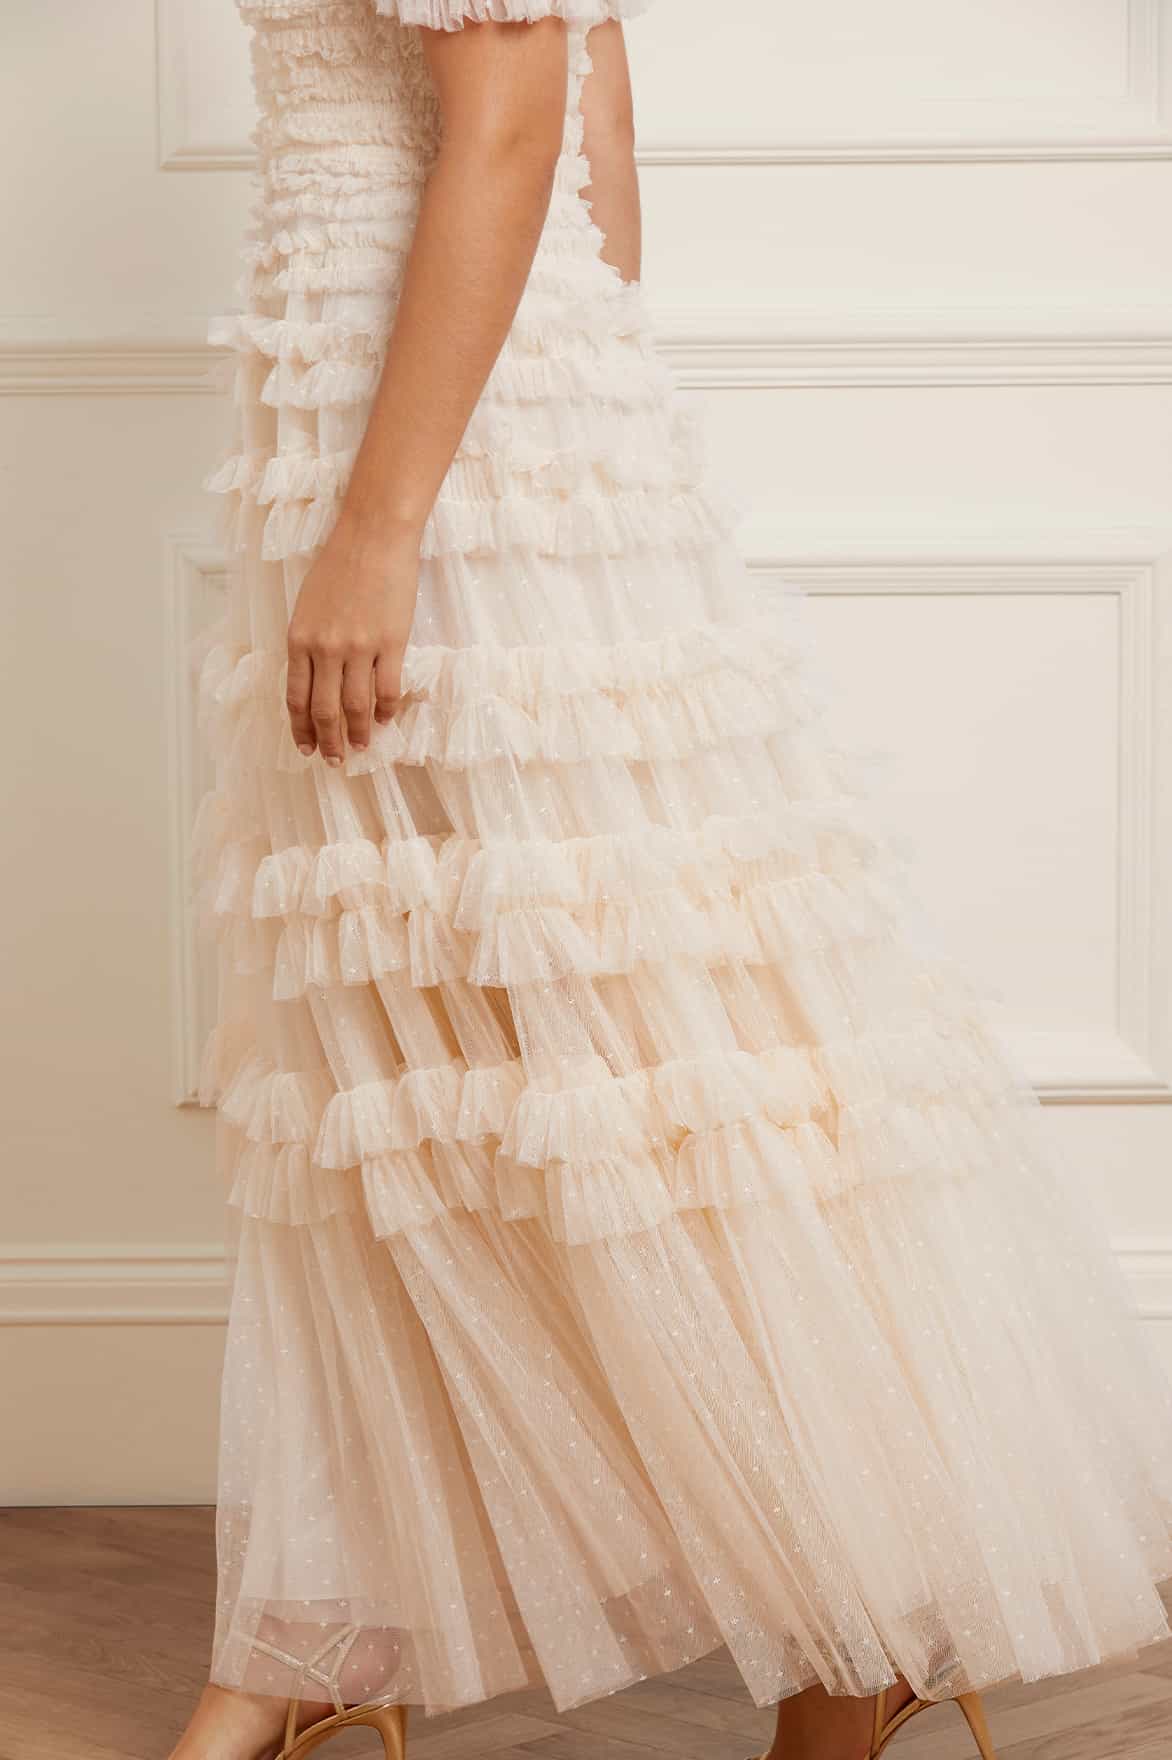 Lisette Ruffle Off Shoulder Gown